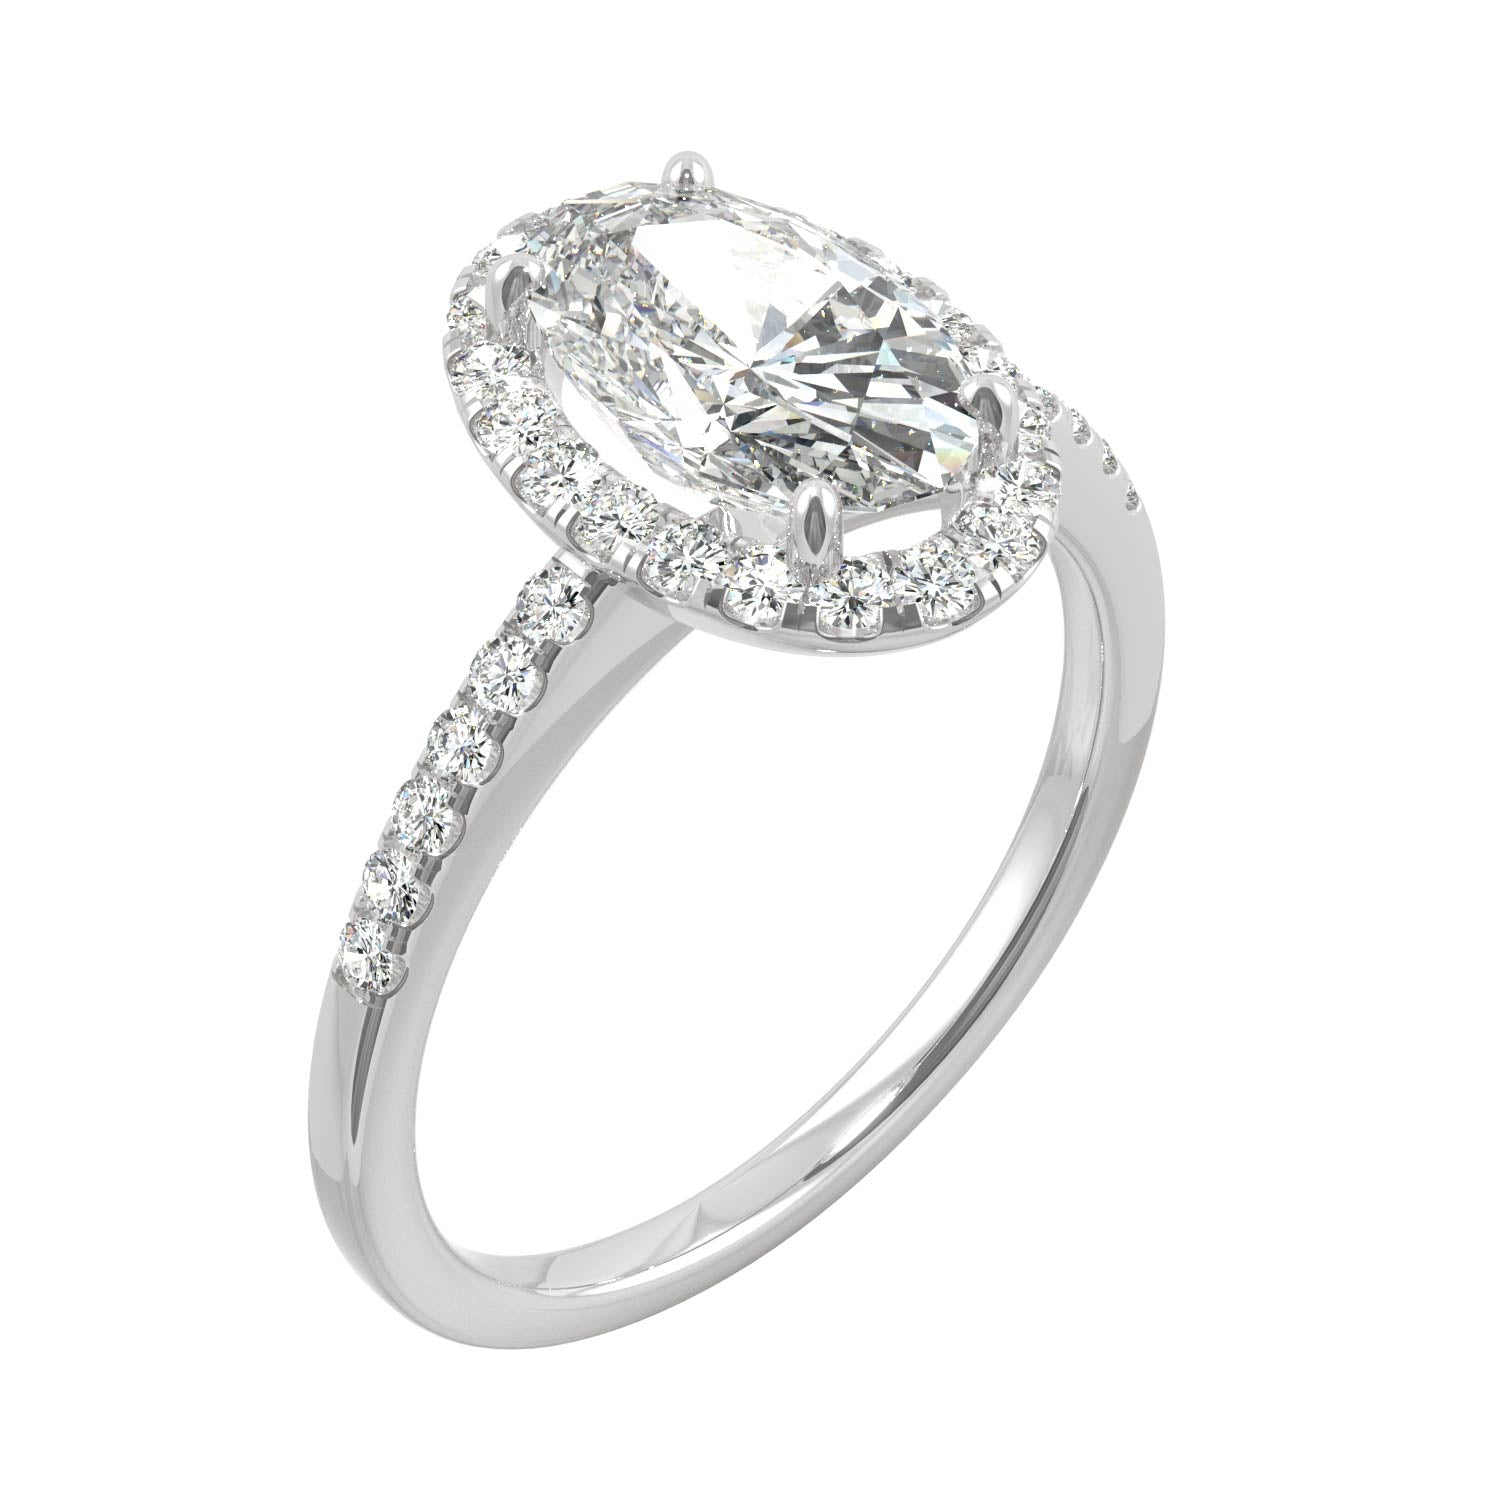 2.62 CTW DEW Elongated Oval Moissanite Halo Ring in 14K White Gold